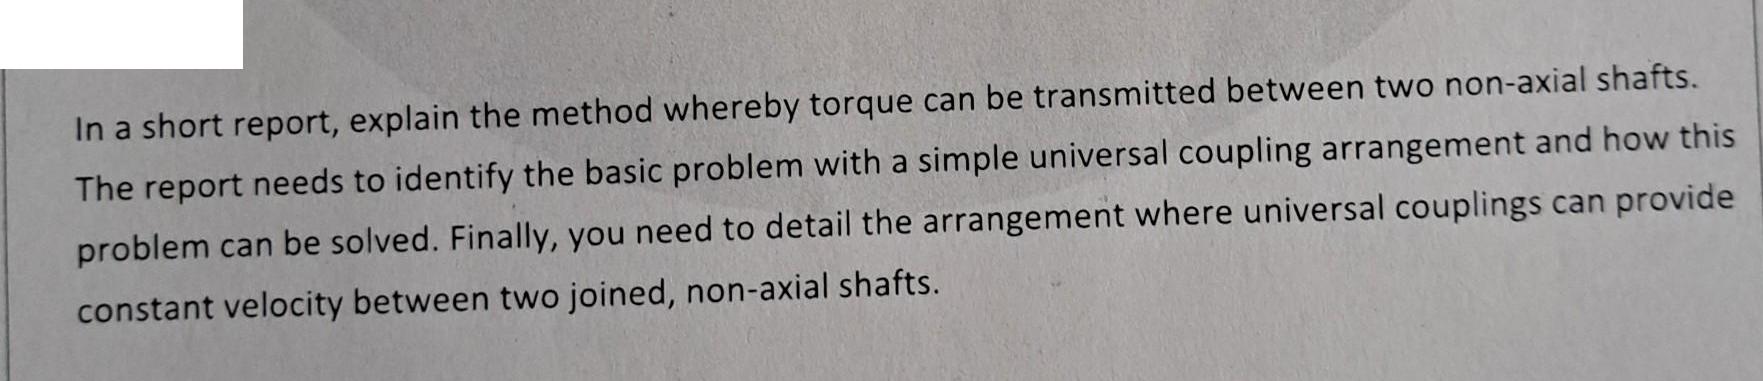 In a short report, explain the method whereby torque can be transmitted between two non-axial shafts. The